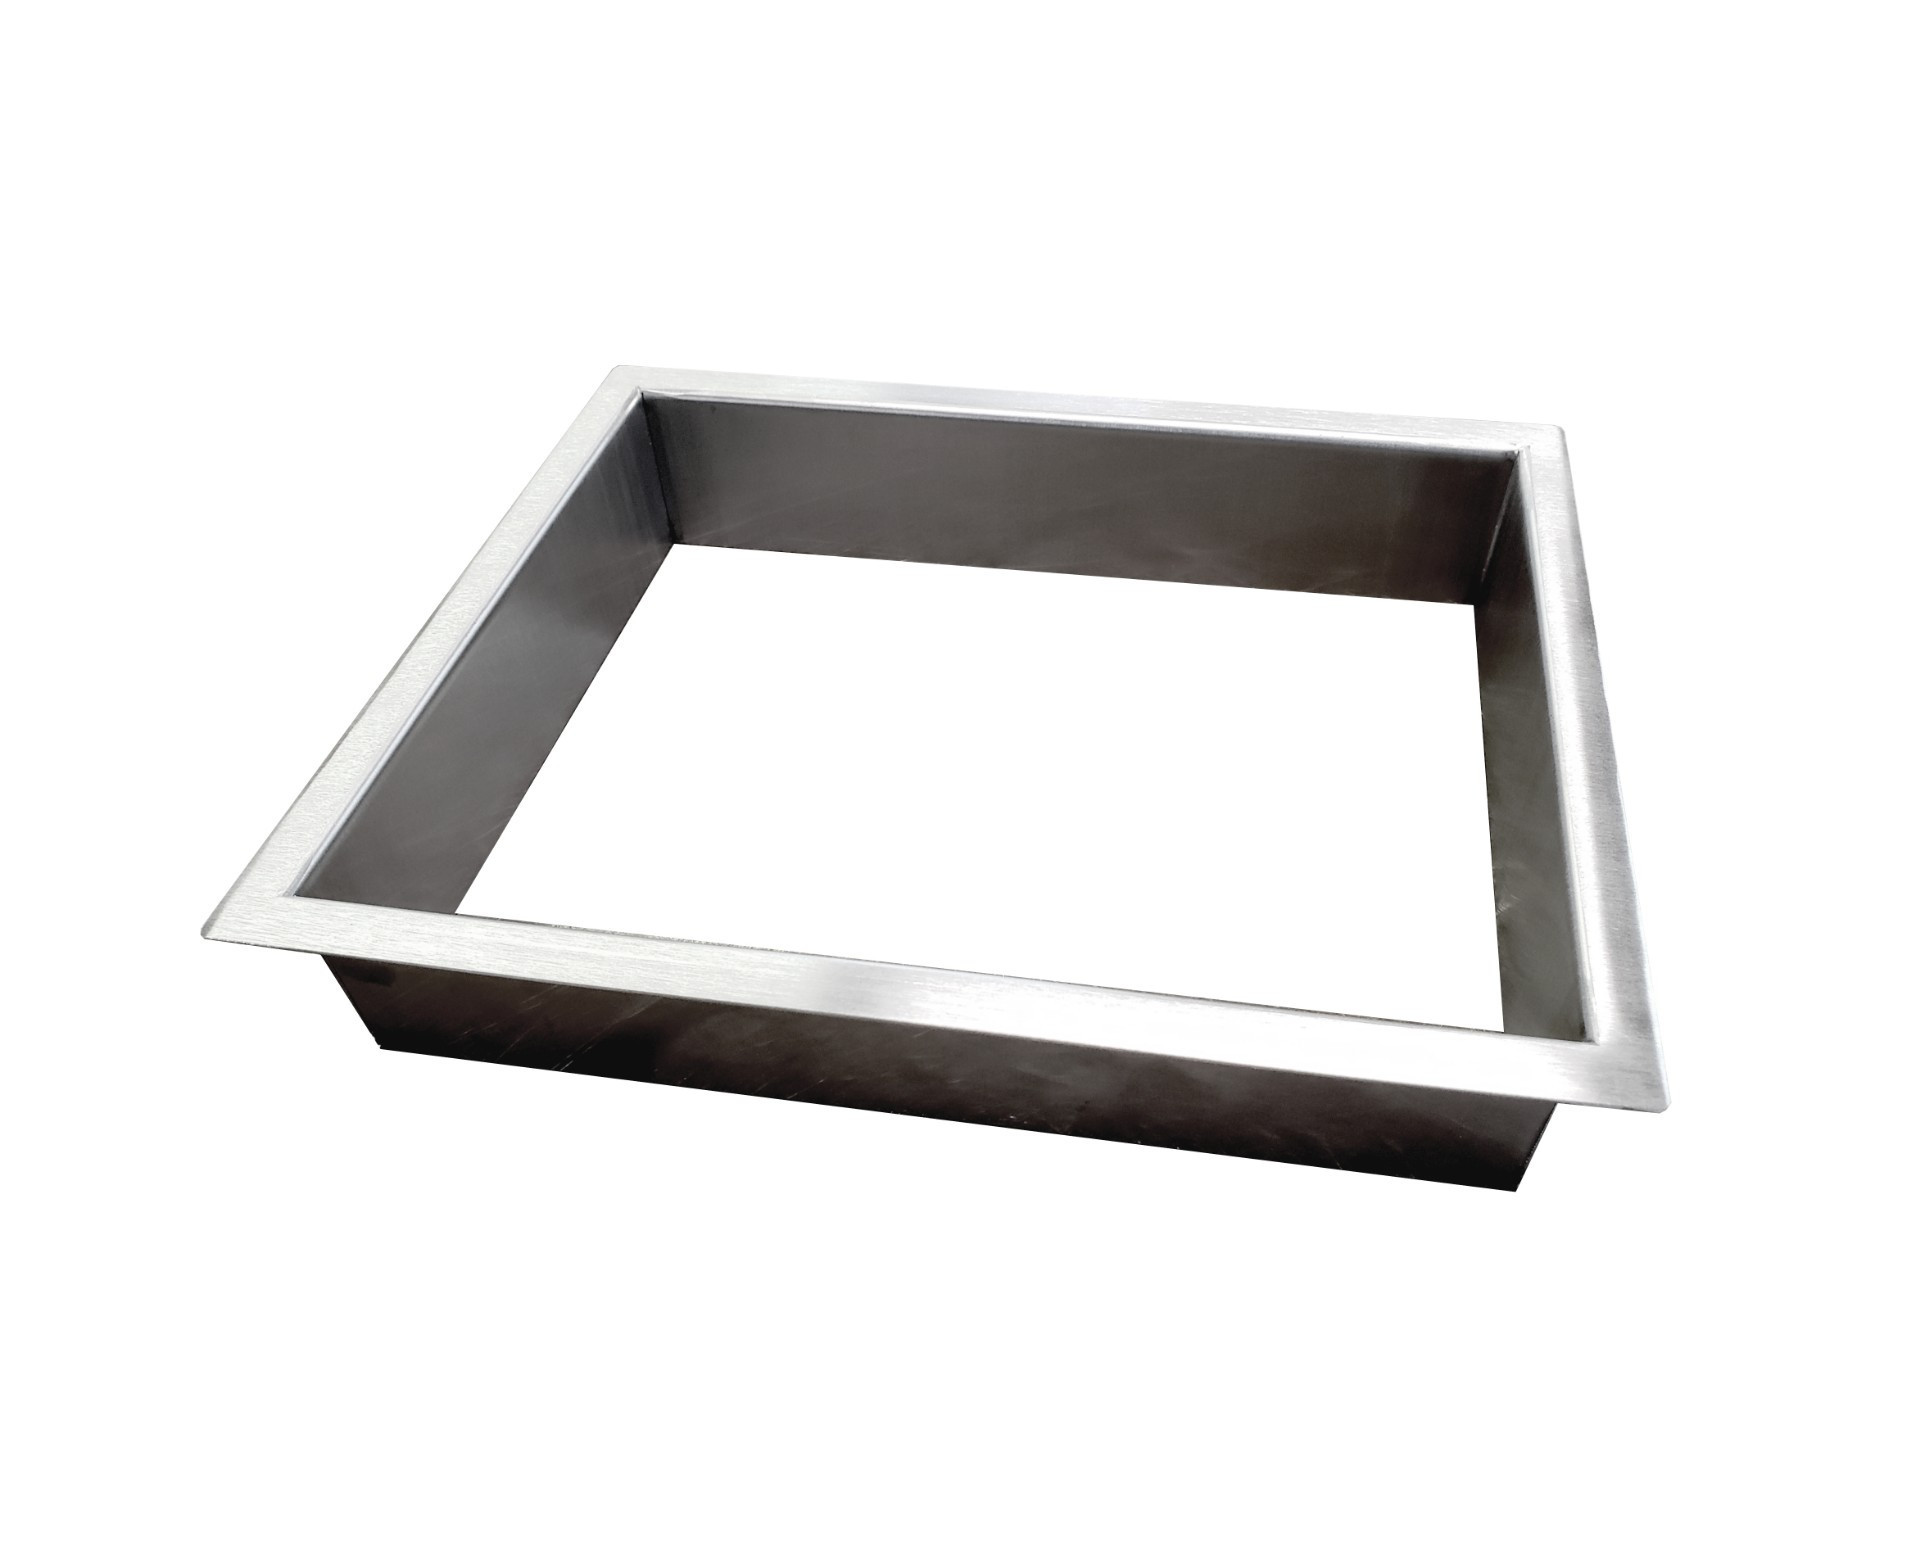 10" Square x 2" Deep Stainless Steel Grommet